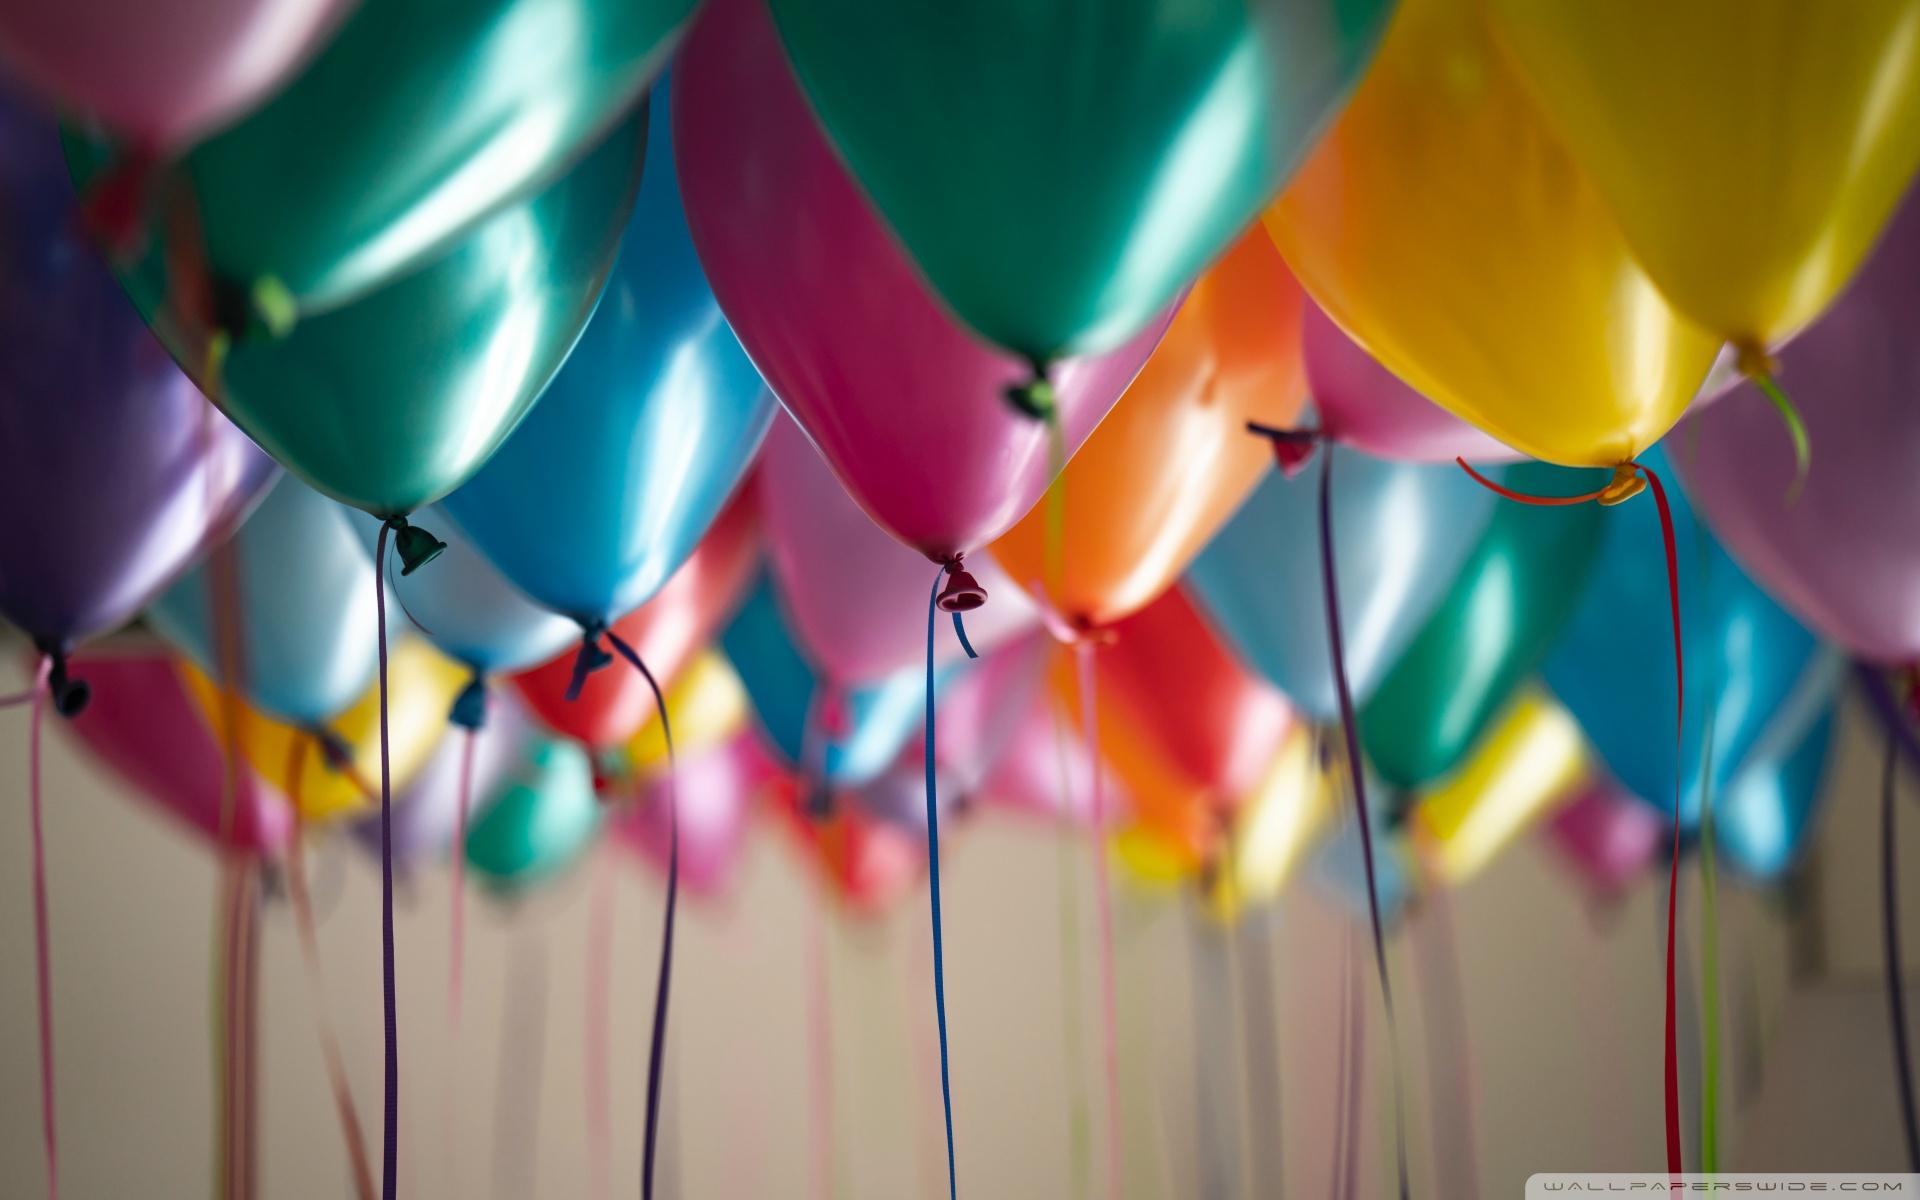 Party Balloons UHD Desktop Wallpapers for 4K Ultra HD TV